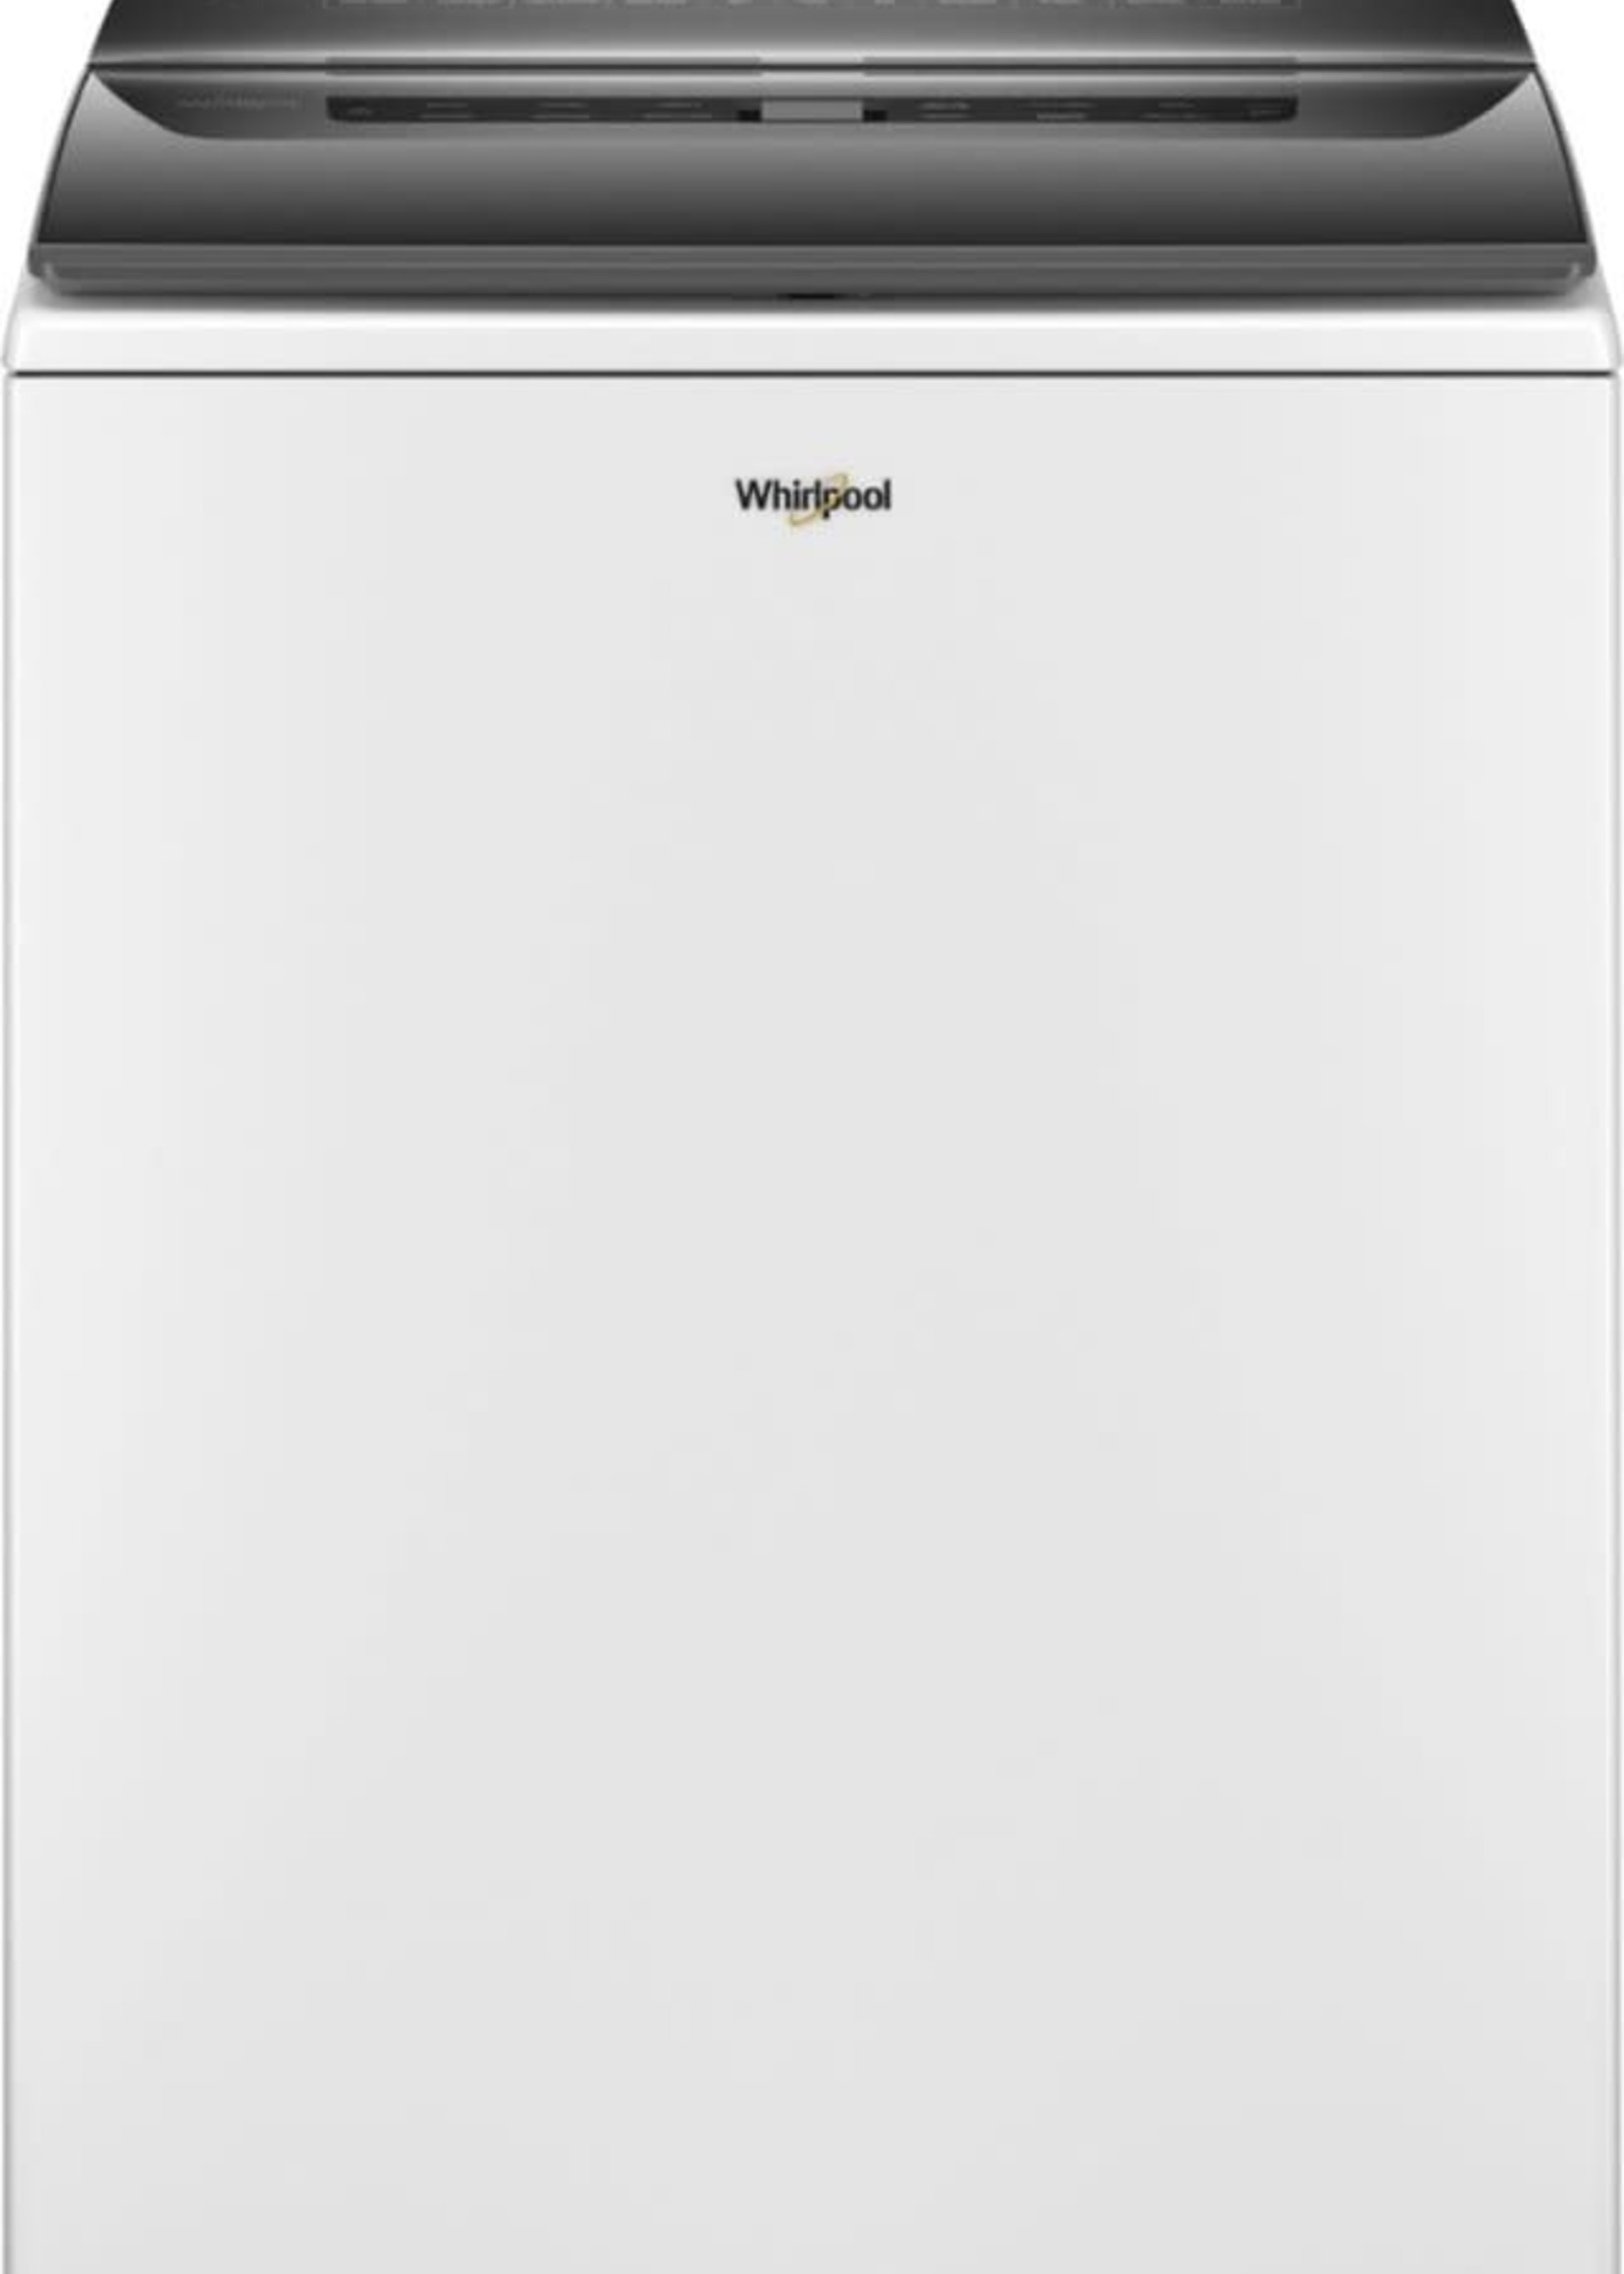 Whirlpool *Whirlpool  WTW5105HW  4.7 cu. ft. White Top Load Washing Machine with Built-in Water Faucet and Stain Brush